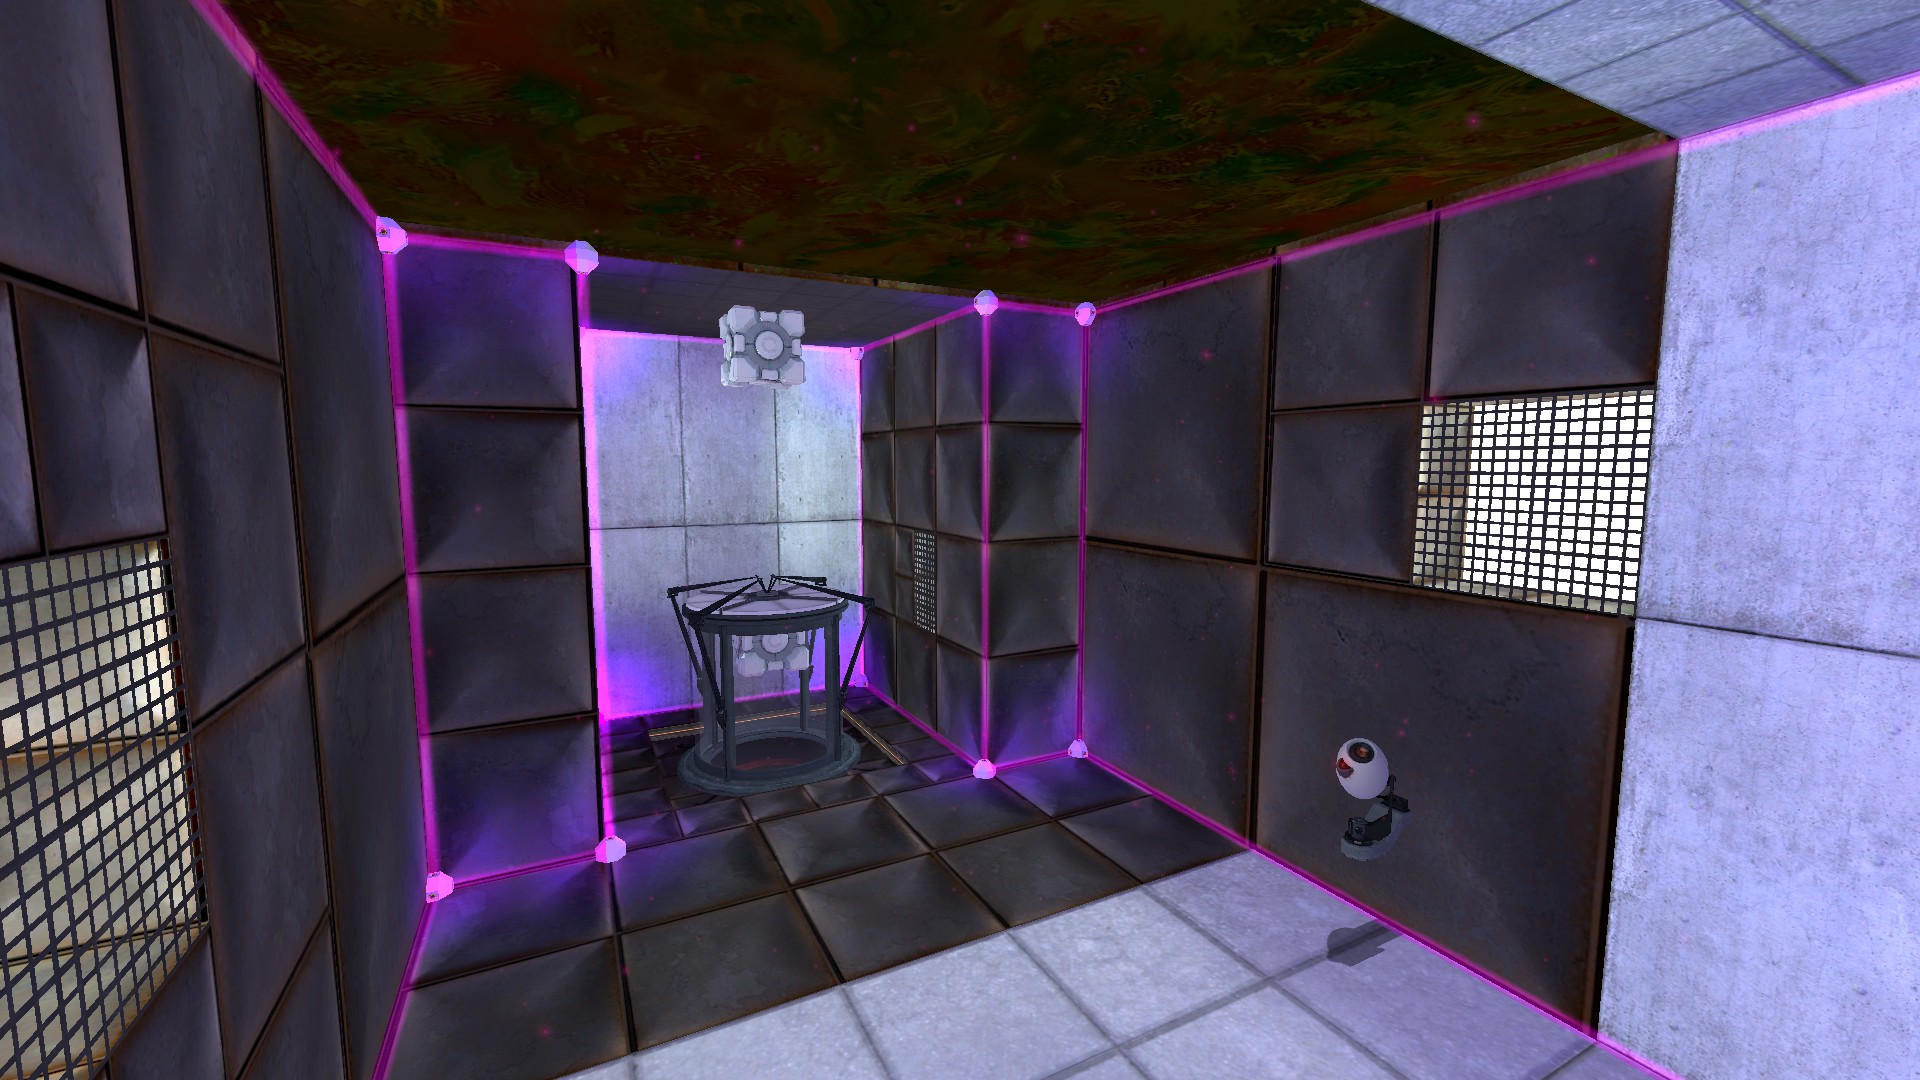 In an upside-down room, a cube sits on the ceiling above an upside-down vital apparatus vent, on the far side of a goo pit of the ceiling.